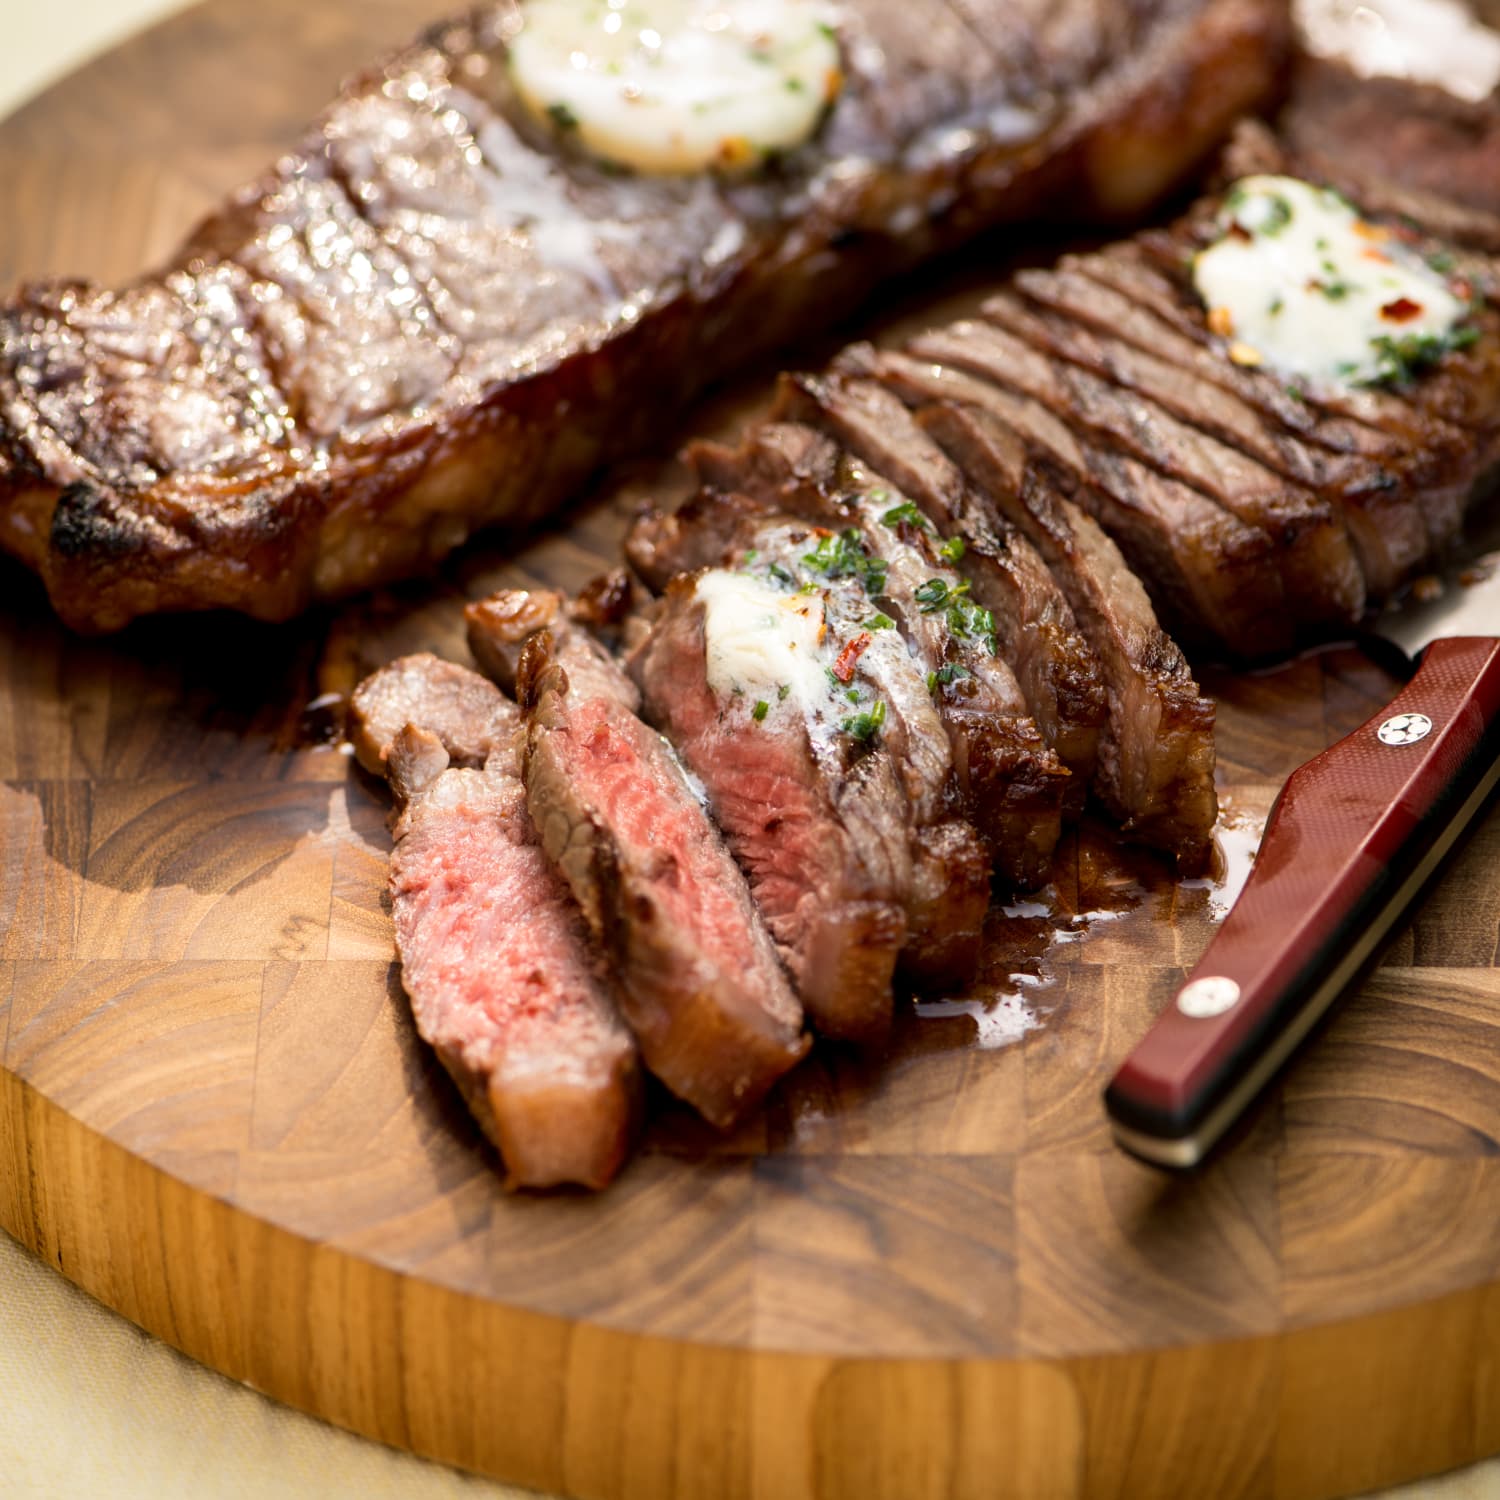 How to Grill a Steak the Right Way
